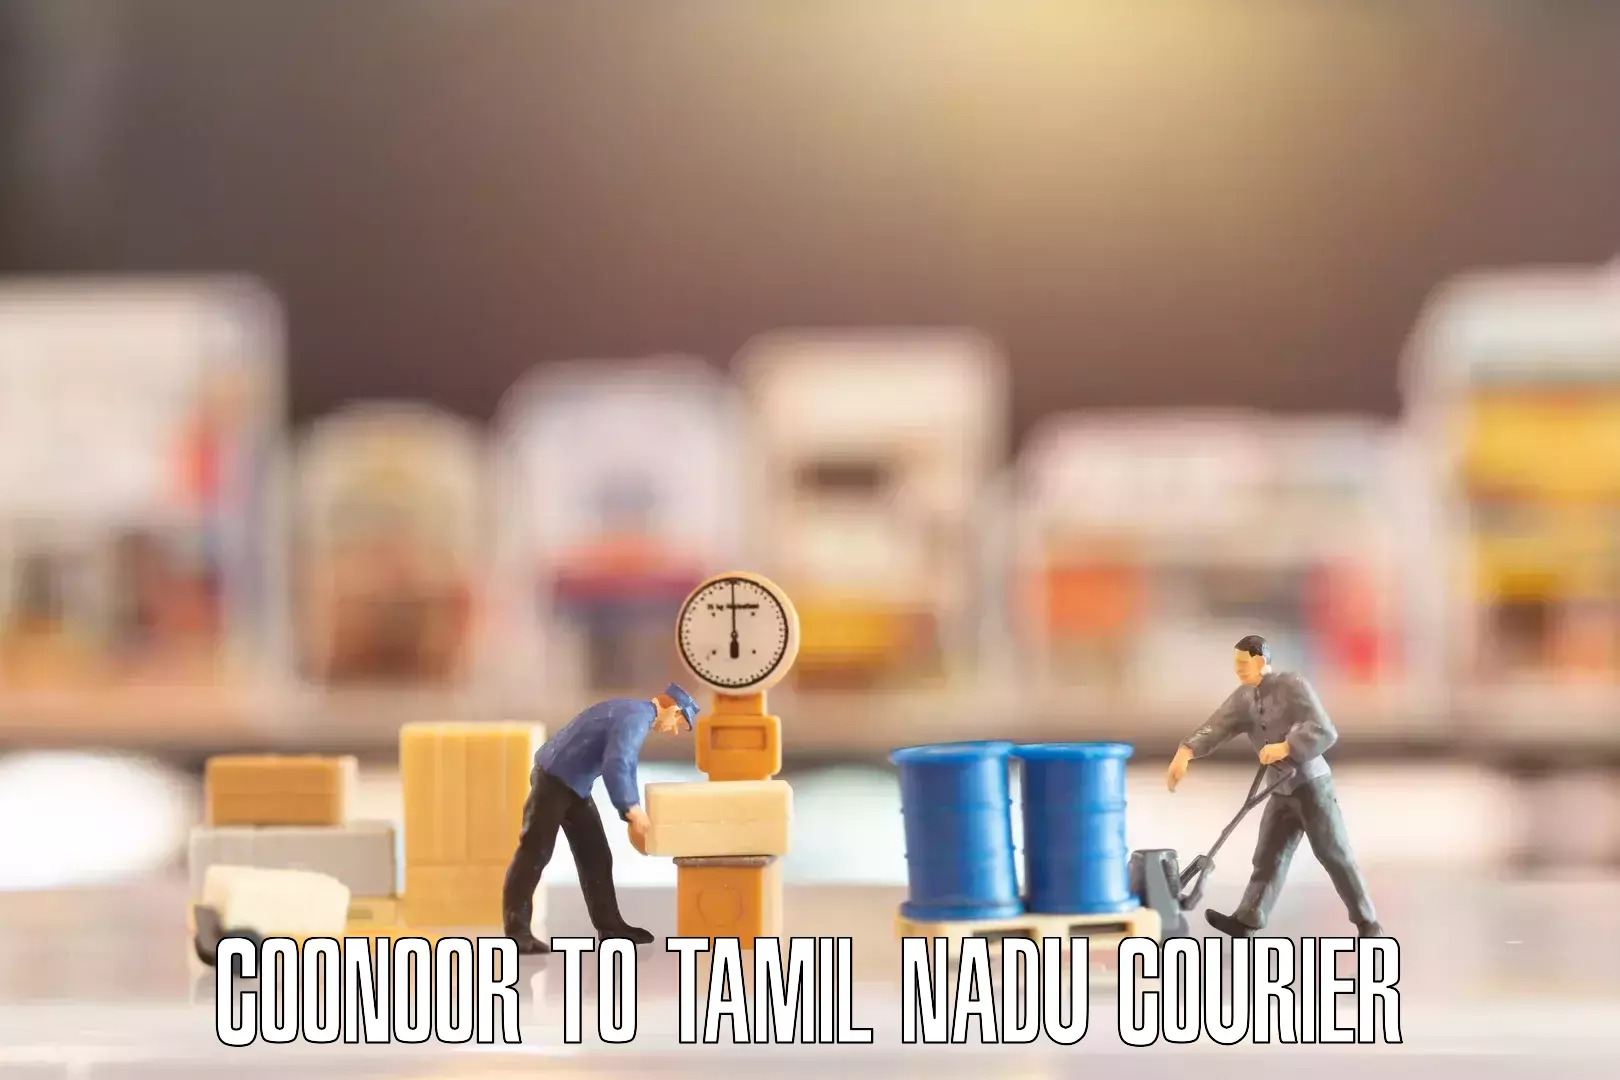 Quality moving company Coonoor to Tamil Nadu